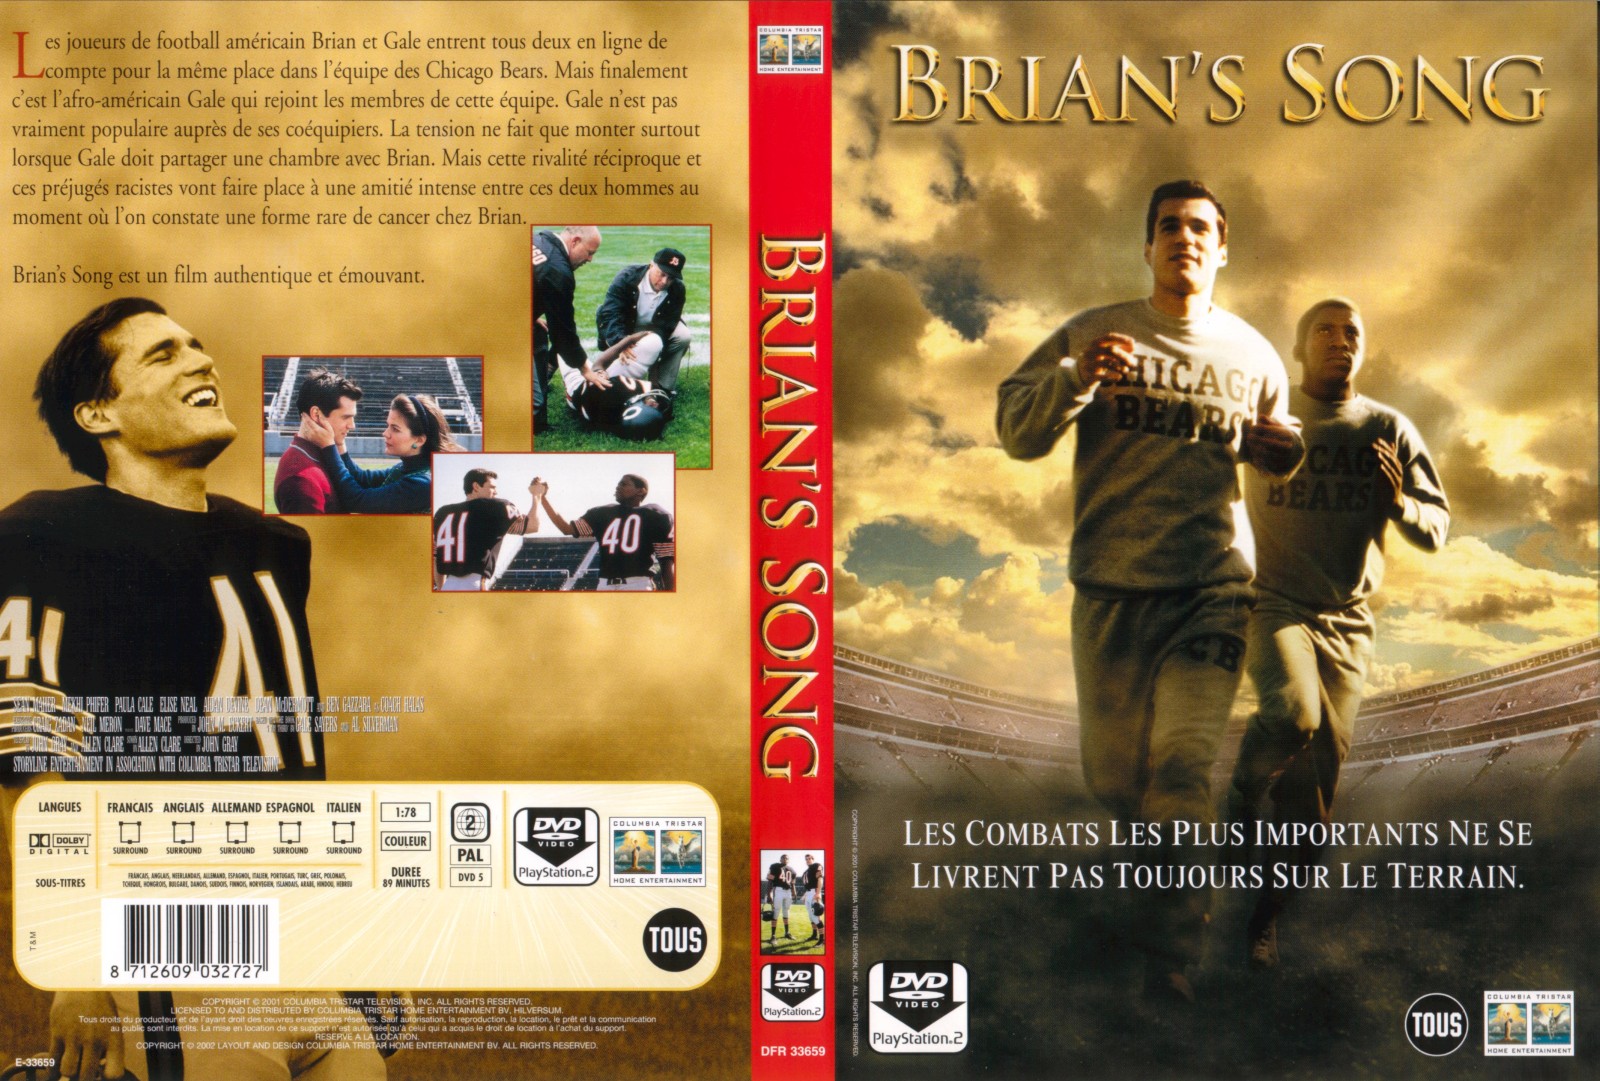 Jaquette DVD Brian song v2